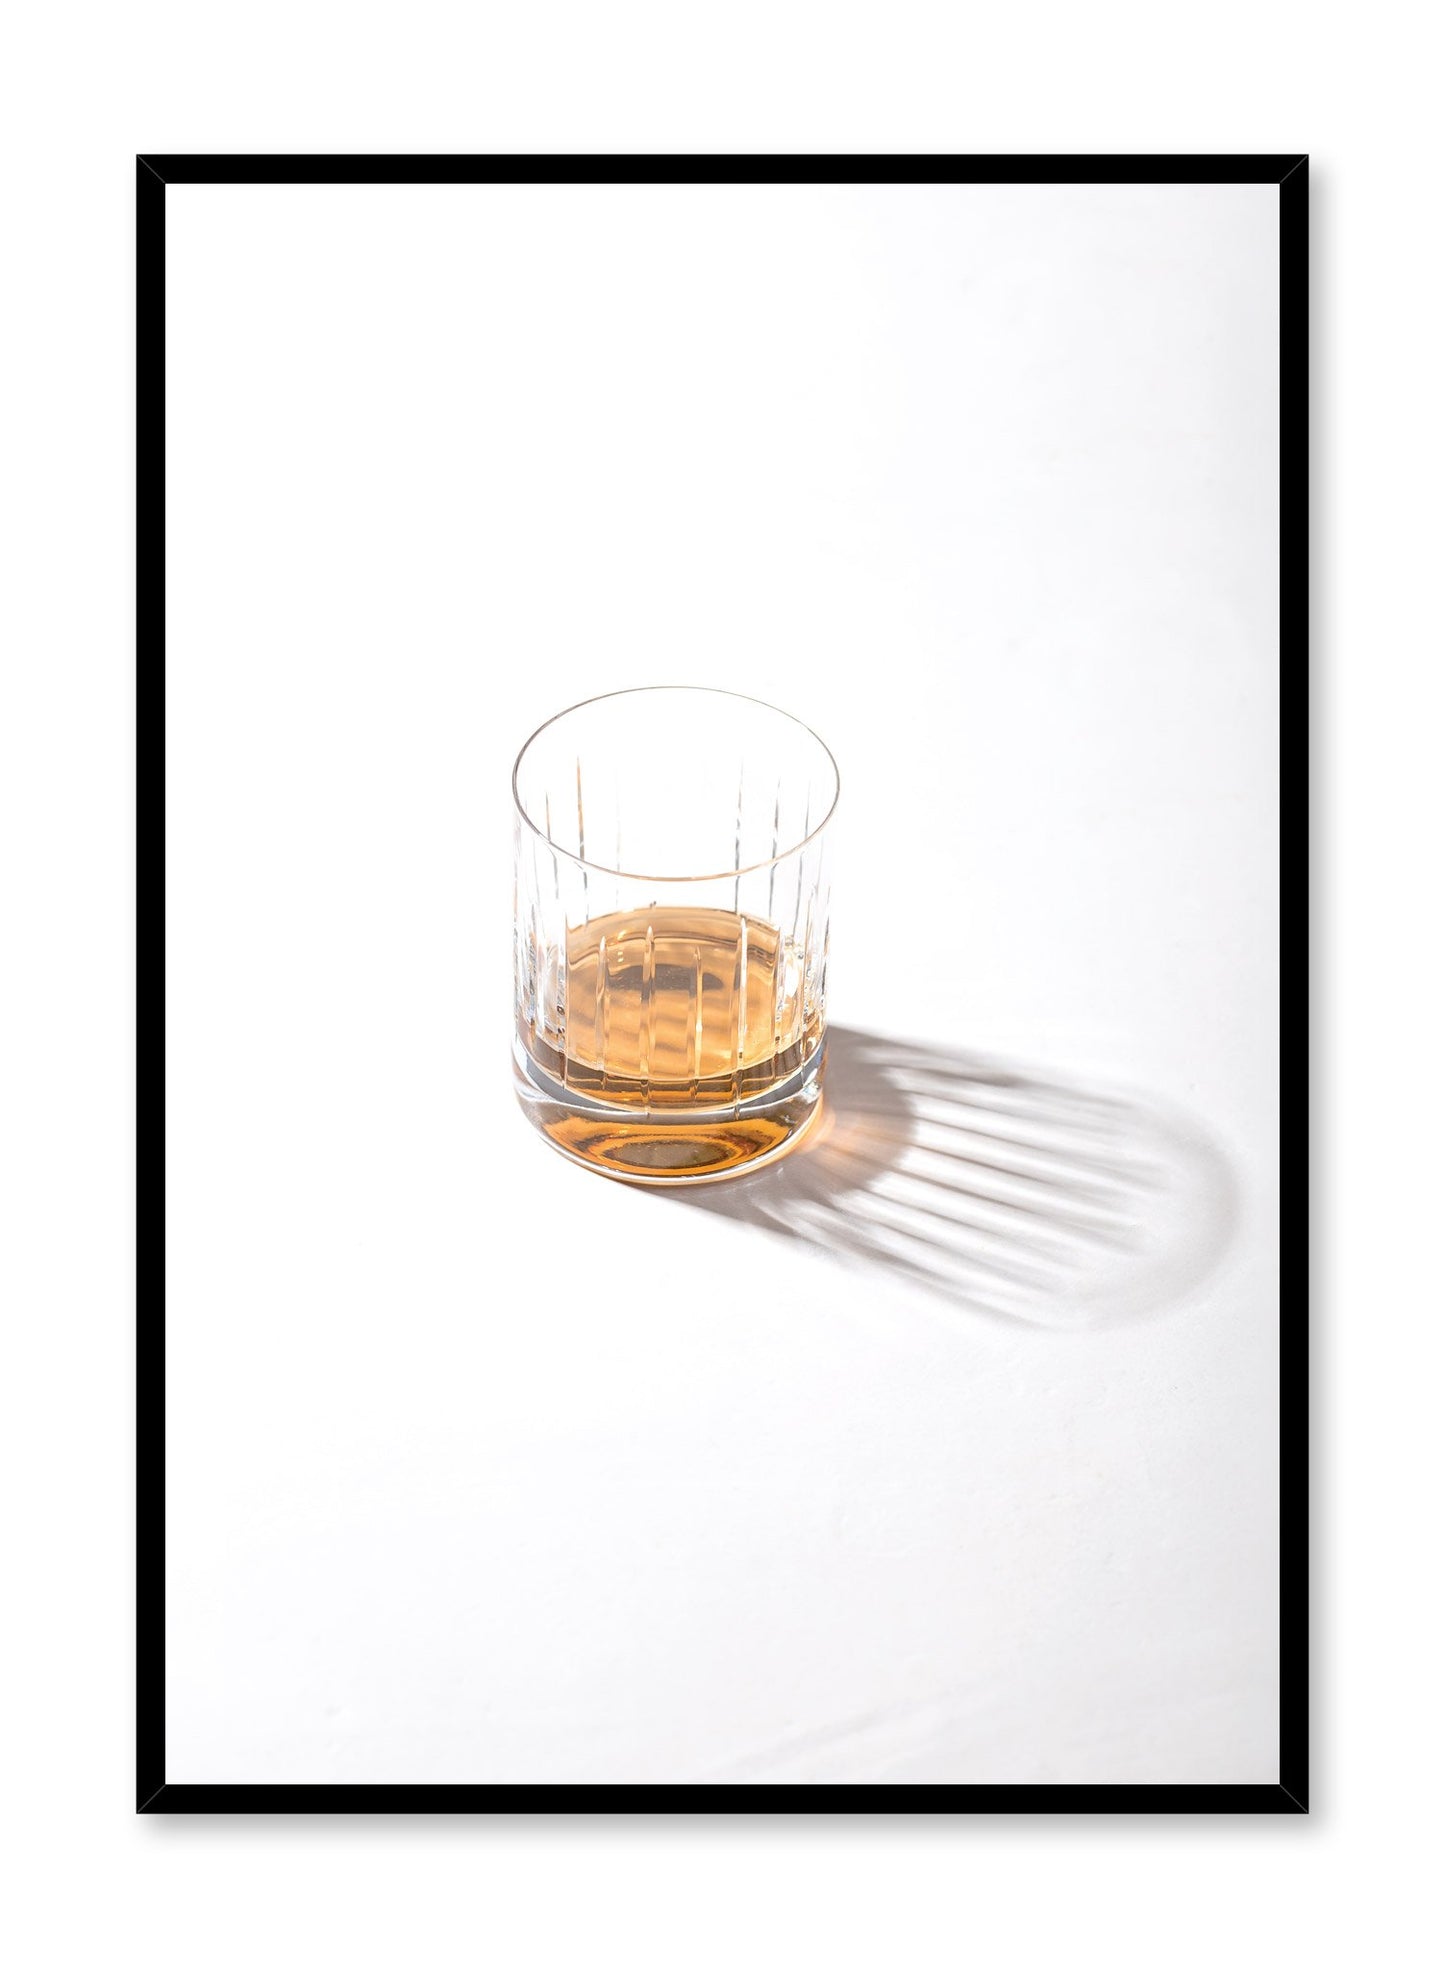 Minimalist poster by Opposite Wall with Scotch drink photography